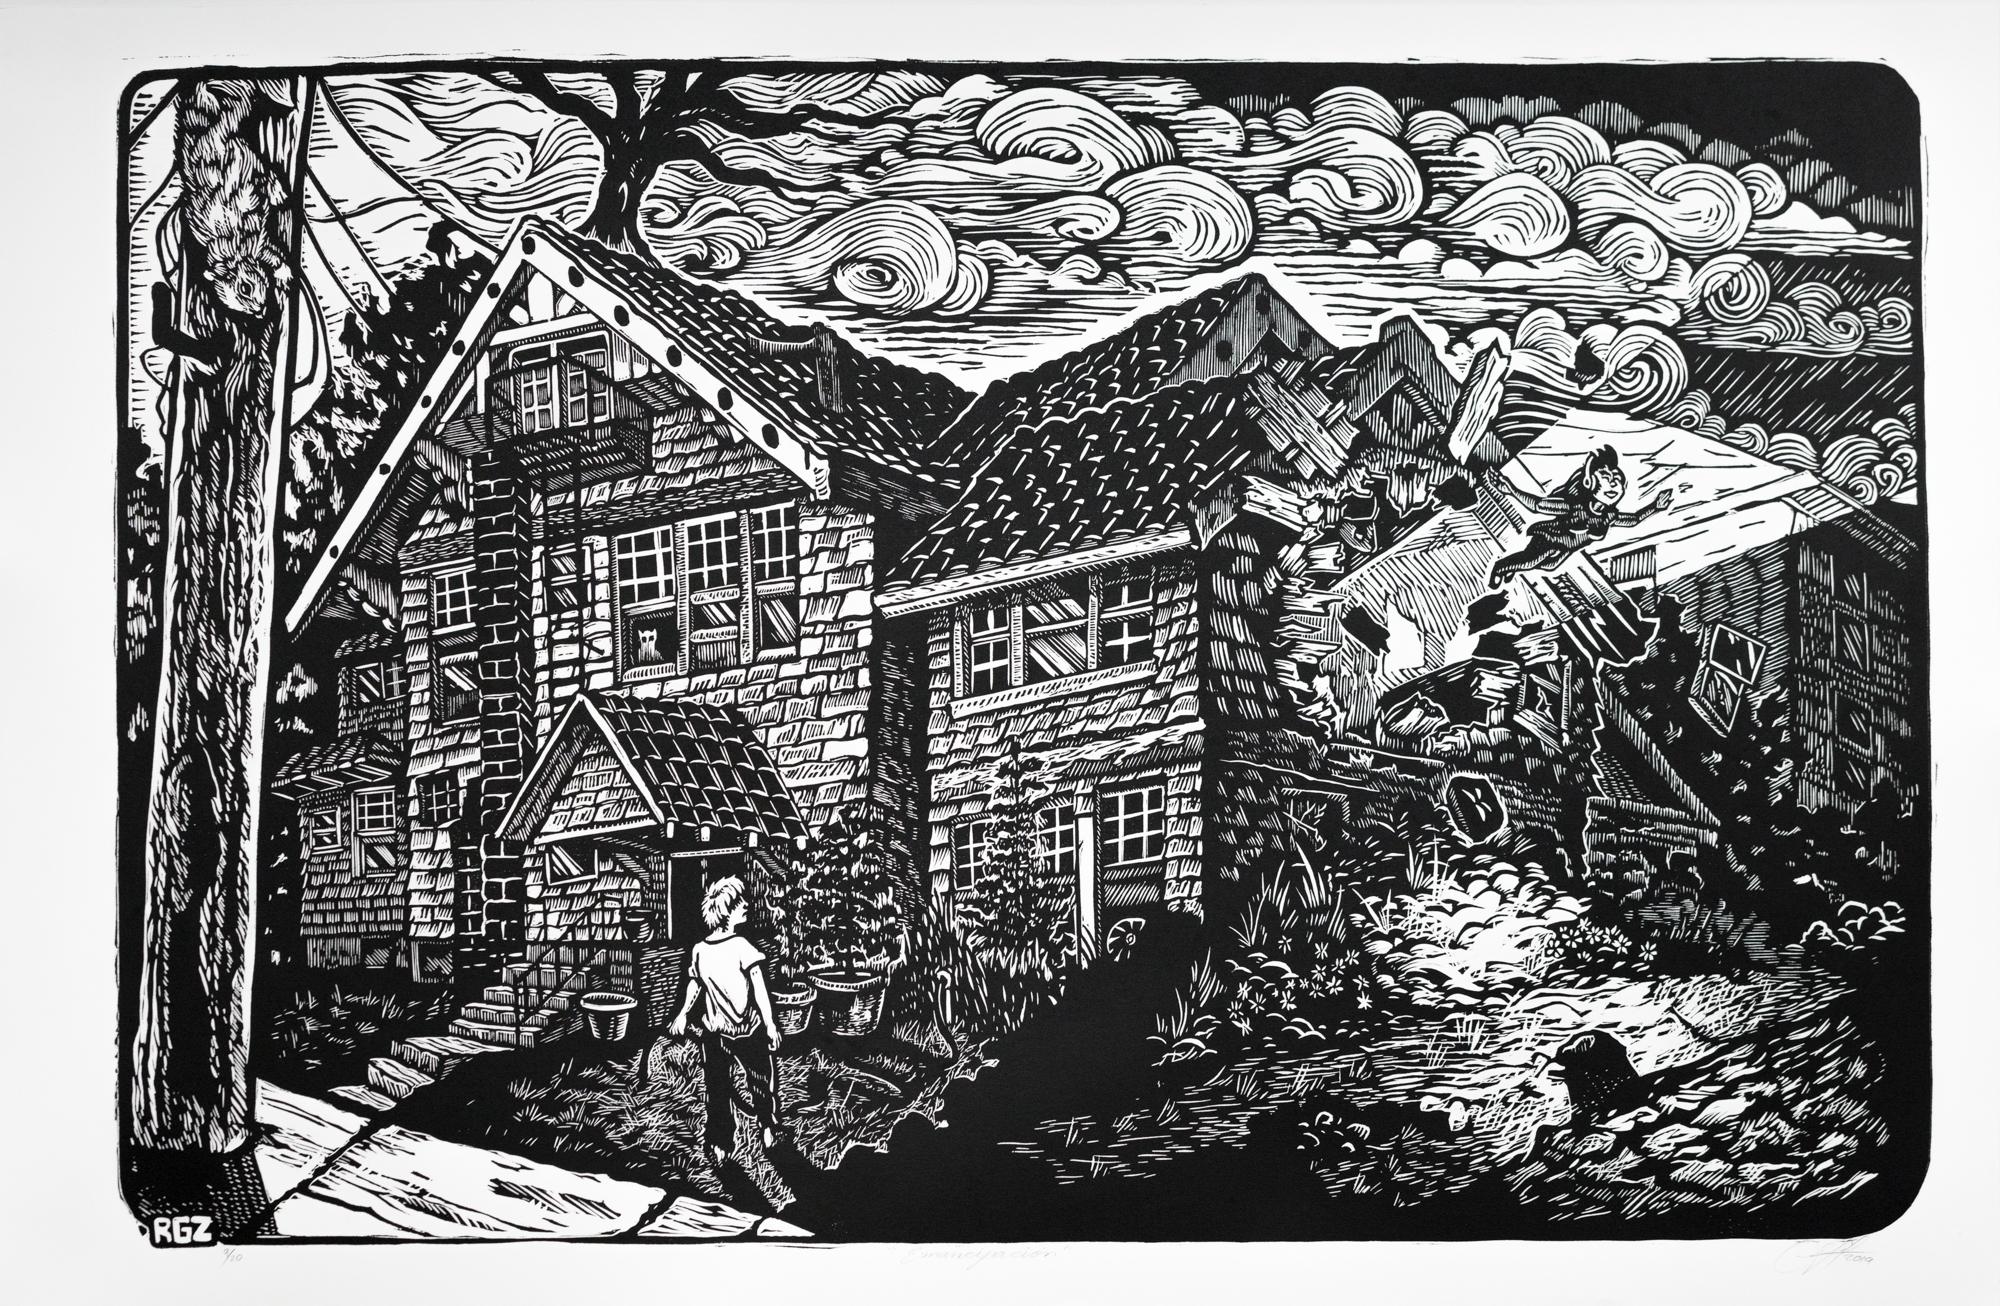 "Emancipation", Depictions of Architecture, Figurative, Relief Print